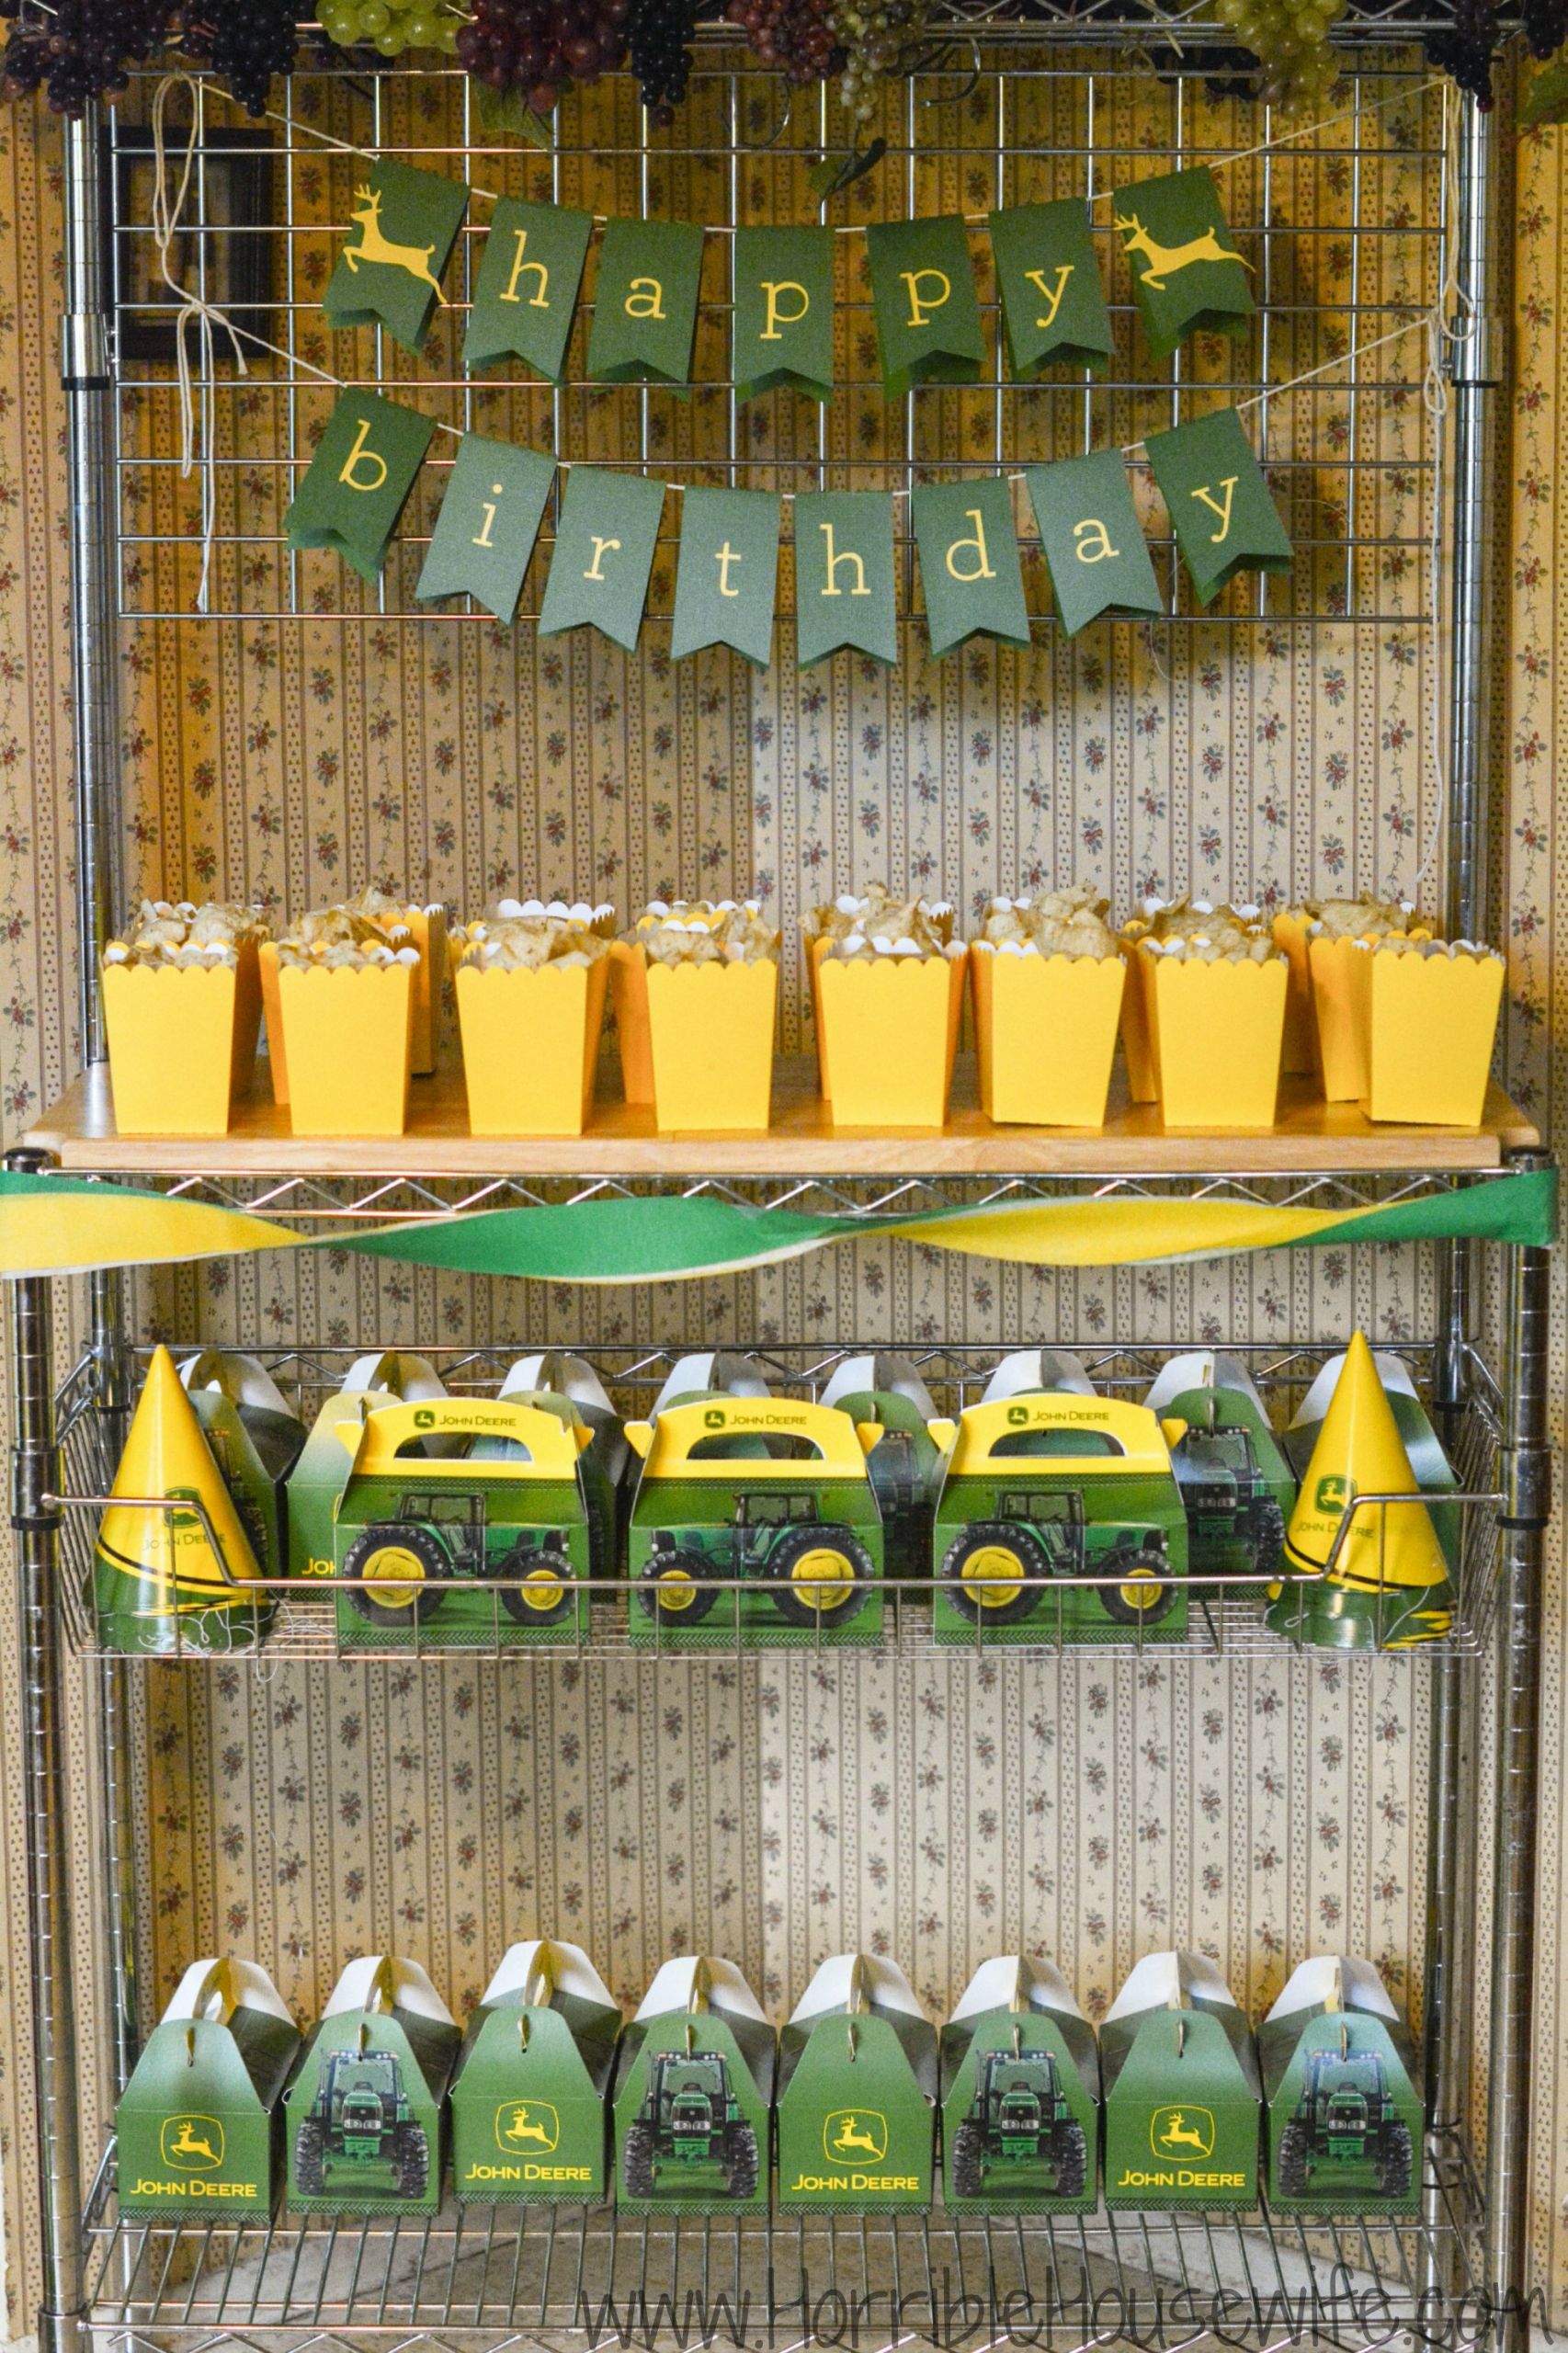 John Deere Birthday Party Supplies
 John Deere Birthday Party Ideas for a 3 Year Old